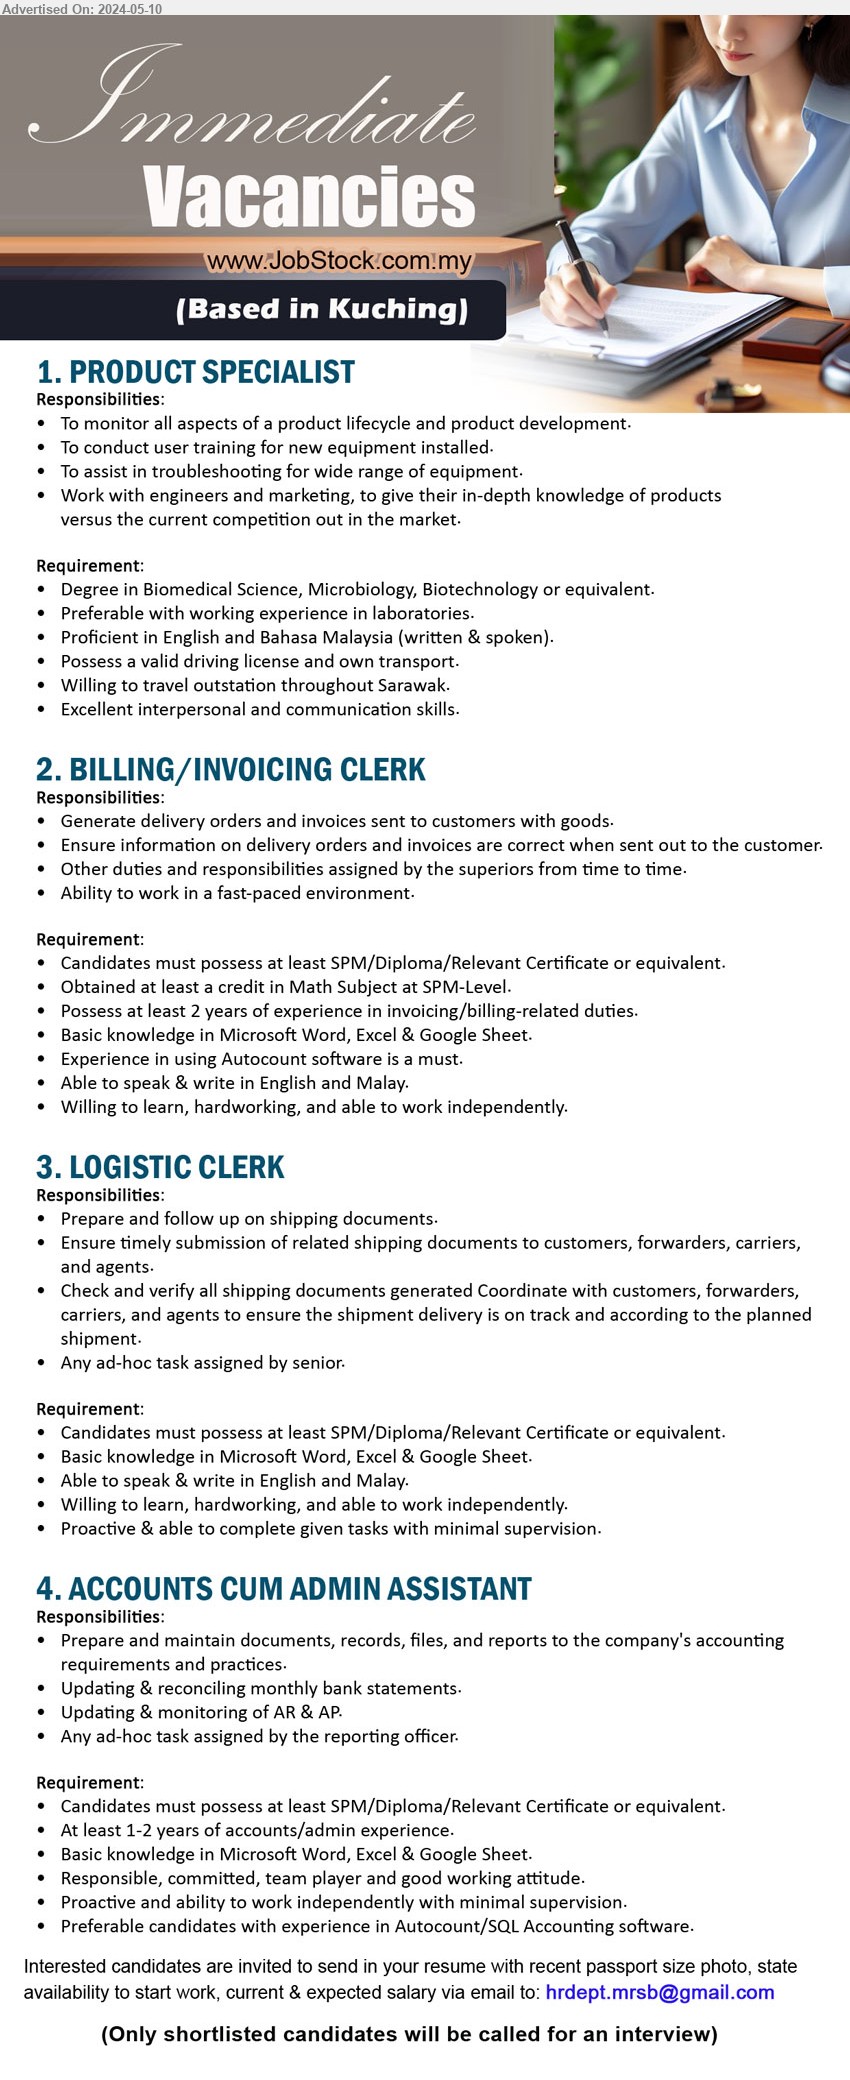 ADVERTISER - 1. PRODUCT SPECIALIST  (Kuching), Degree in Biomedical Science, Microbiology, Biotechnology,...
2. BILLING/INVOICING CLERK  (Kuching), SPM/Diploma/Relevant Certificate, Obtained at least a credit in Math Subject at SPM-Level.,...
3. LOGISTIC CLERK  (Kuching), SPM/Diploma/Relevant Certificate, Basic knowledge in Microsoft Word, Excel & Google Sheet.,...
4. ACCOUNTS CUM ADMIN ASSISTANT   (Kuching), SPM/Diploma/Relevant Certificate, At least 1-2 years of accounts/admin experience,...
Email resume to ...